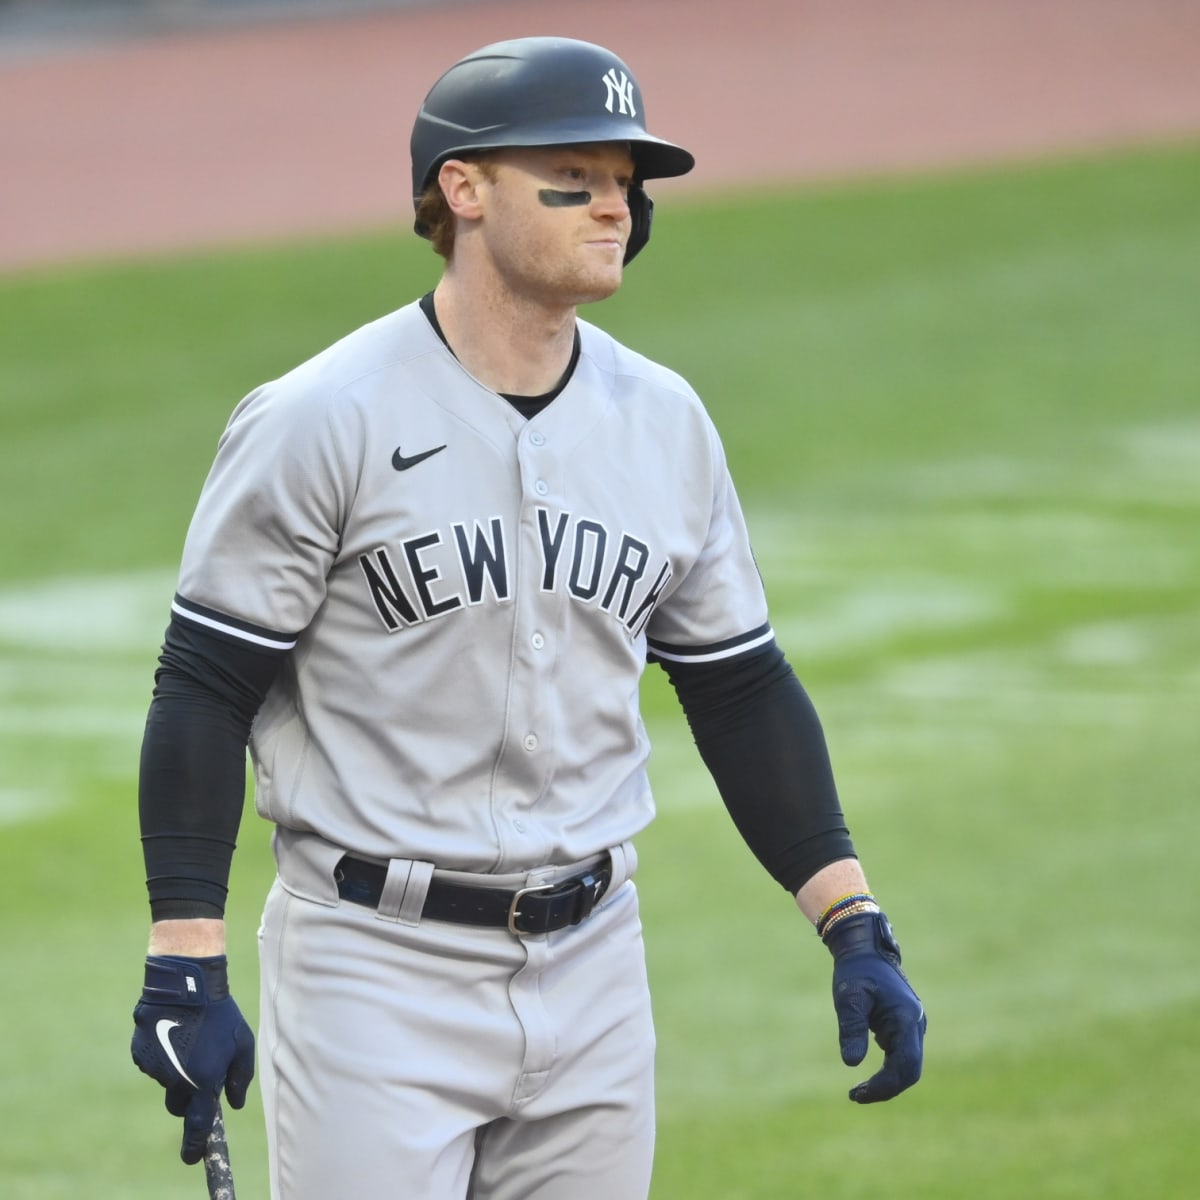 Cubs OF Clint Frazier anxious to return to Chicago after appendectomy